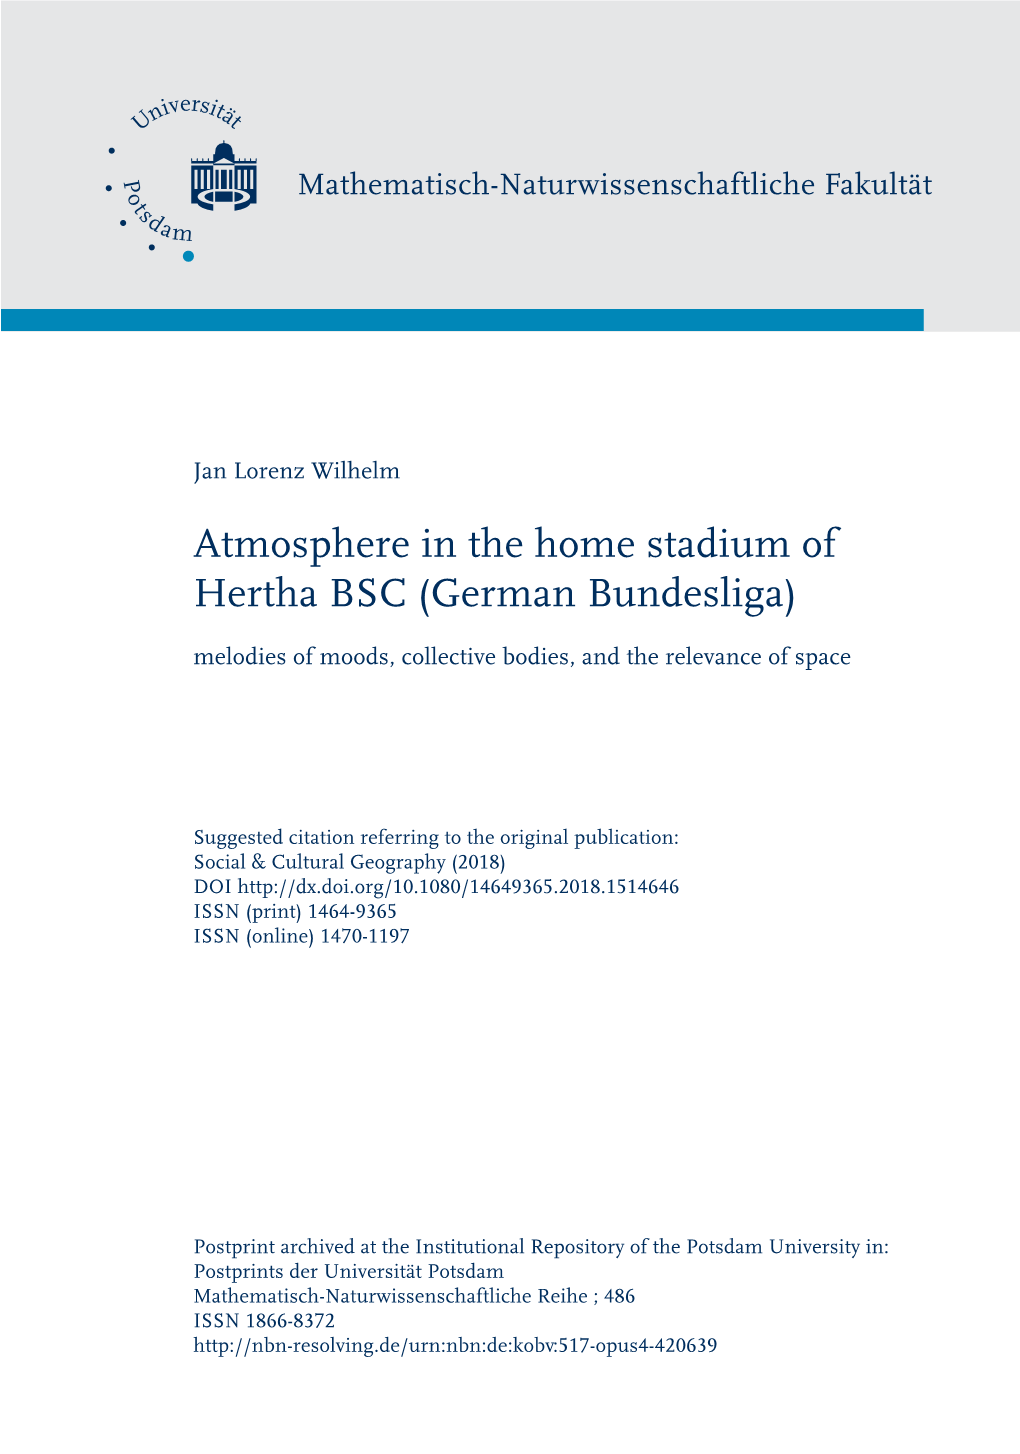 Atmosphere in the Home Stadium of Hertha BSC (German Bundesliga) Melodies of Moods, Collective Bodies, and the Relevance of Space